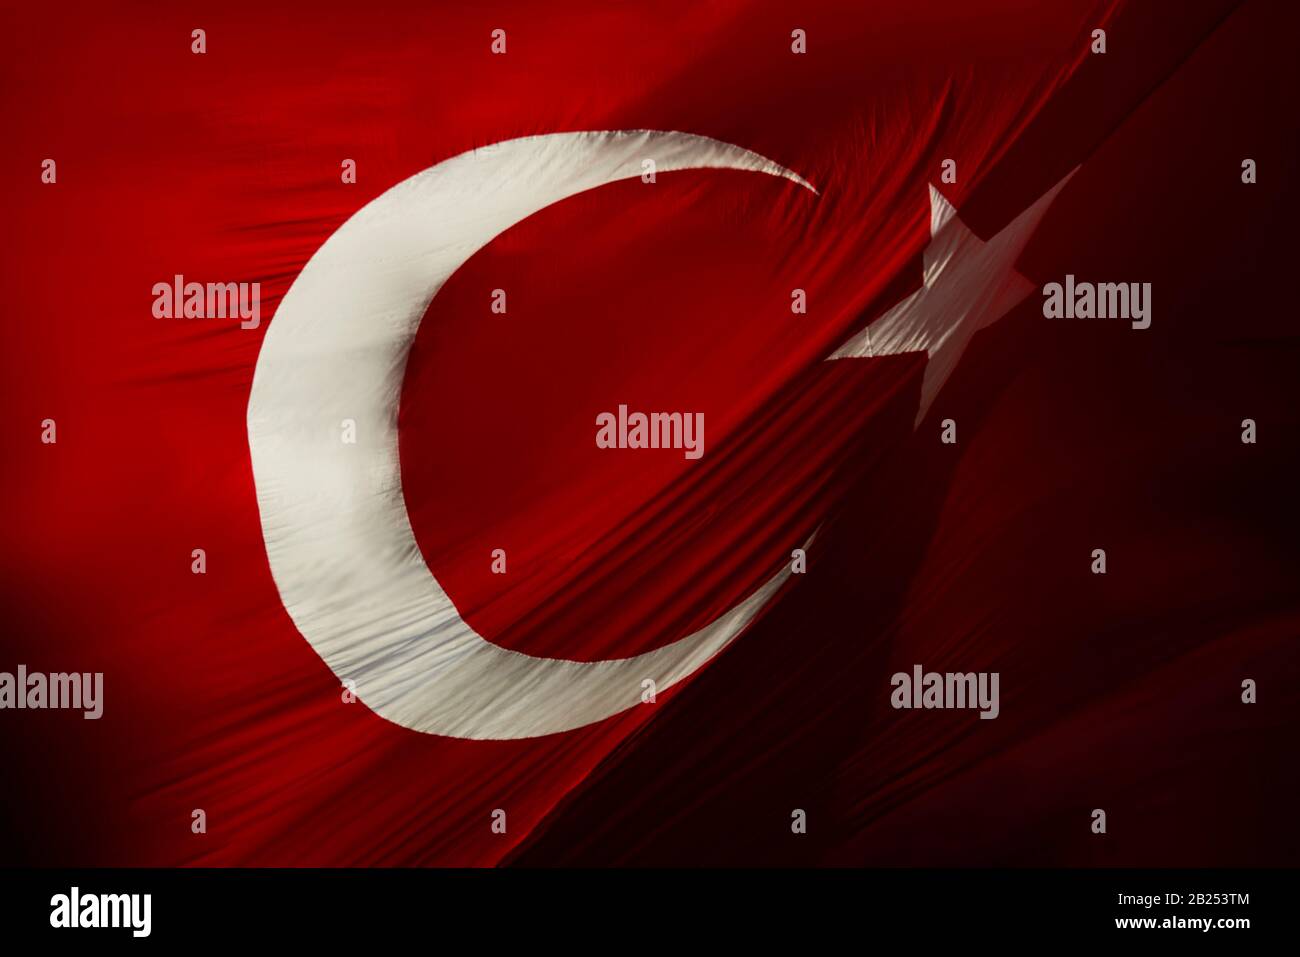 Photo of Glorious Real Turkish flag background texture waving with real wrinkles on it. Stock Photo